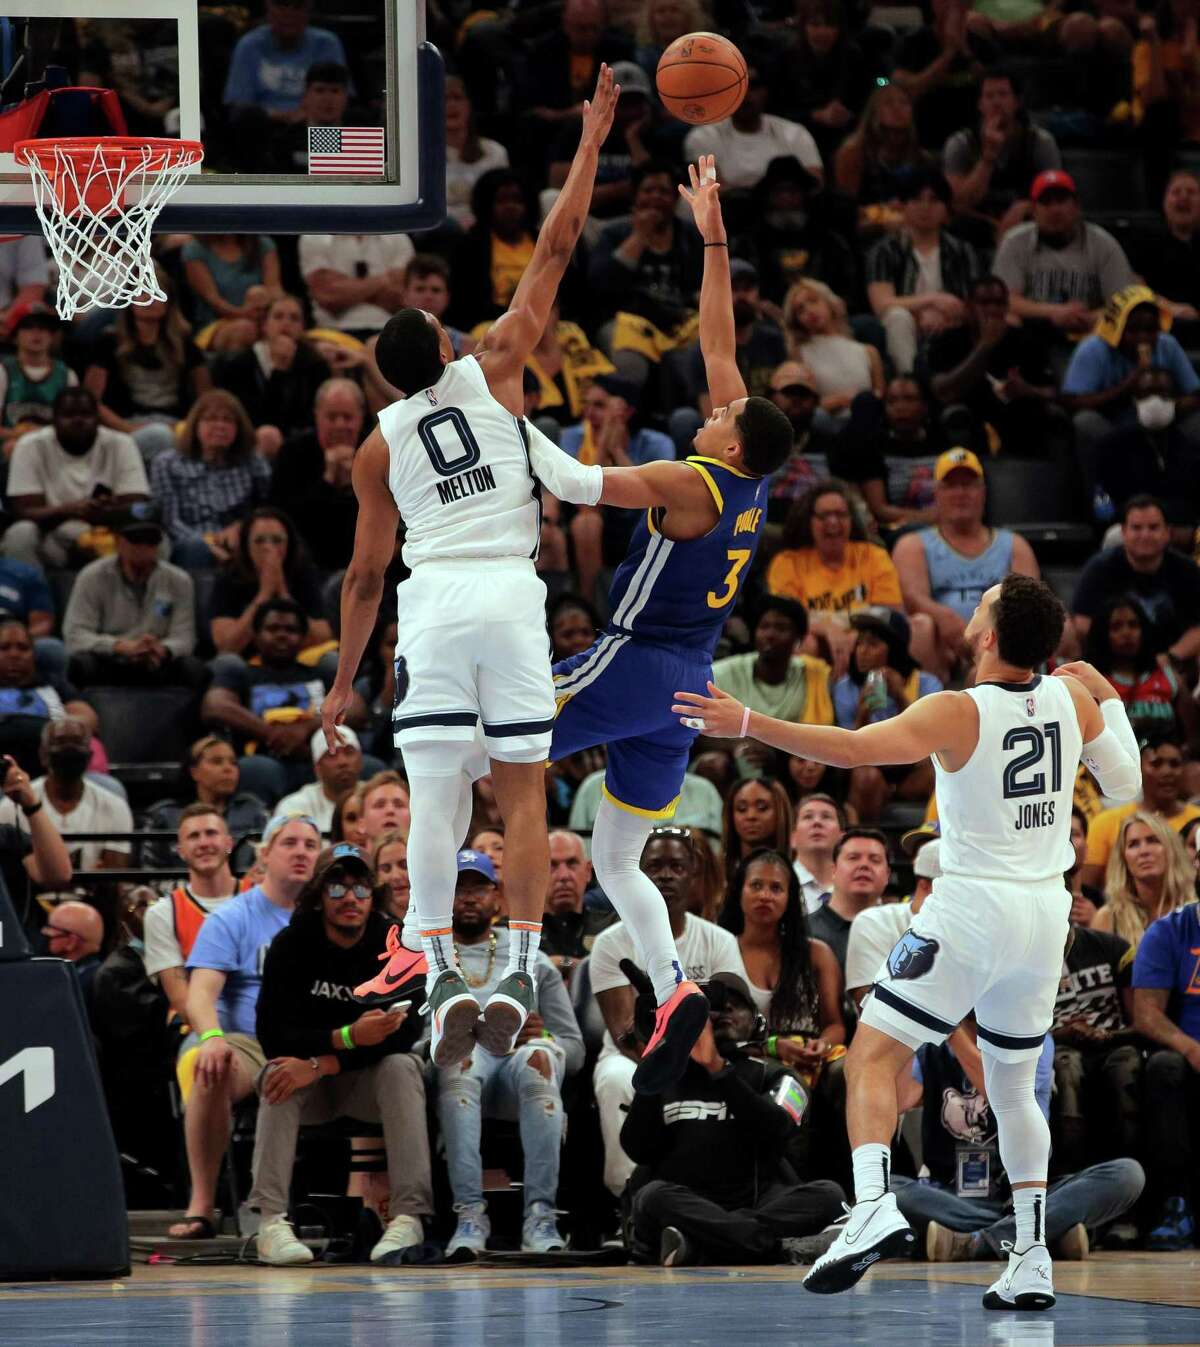 Jordan Poole (3) puts up a shot in the second half as the Golden State Warriors played the Memphis Grizzlies in Game 1 of the second round of the NBA Playoffs at Fedex Forum in Memphis, Tenn., on Sunday, May 1, 2022.